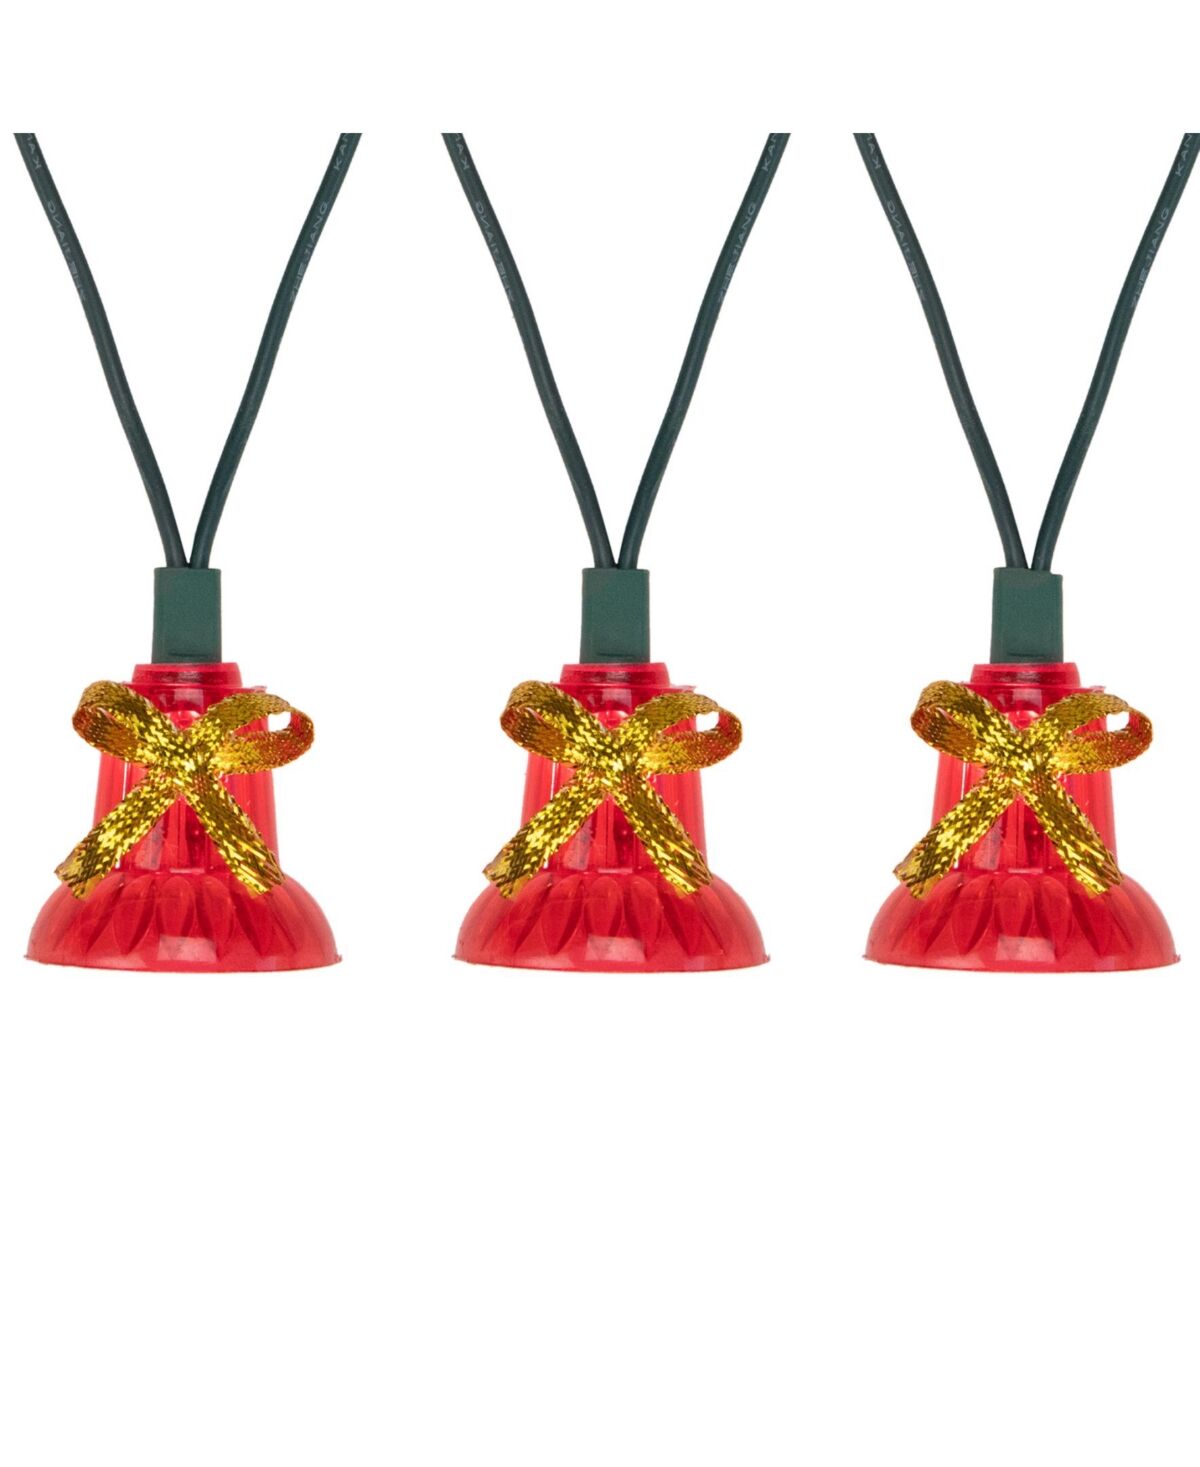 Northlight Bells with Musical Christmas Light - Red